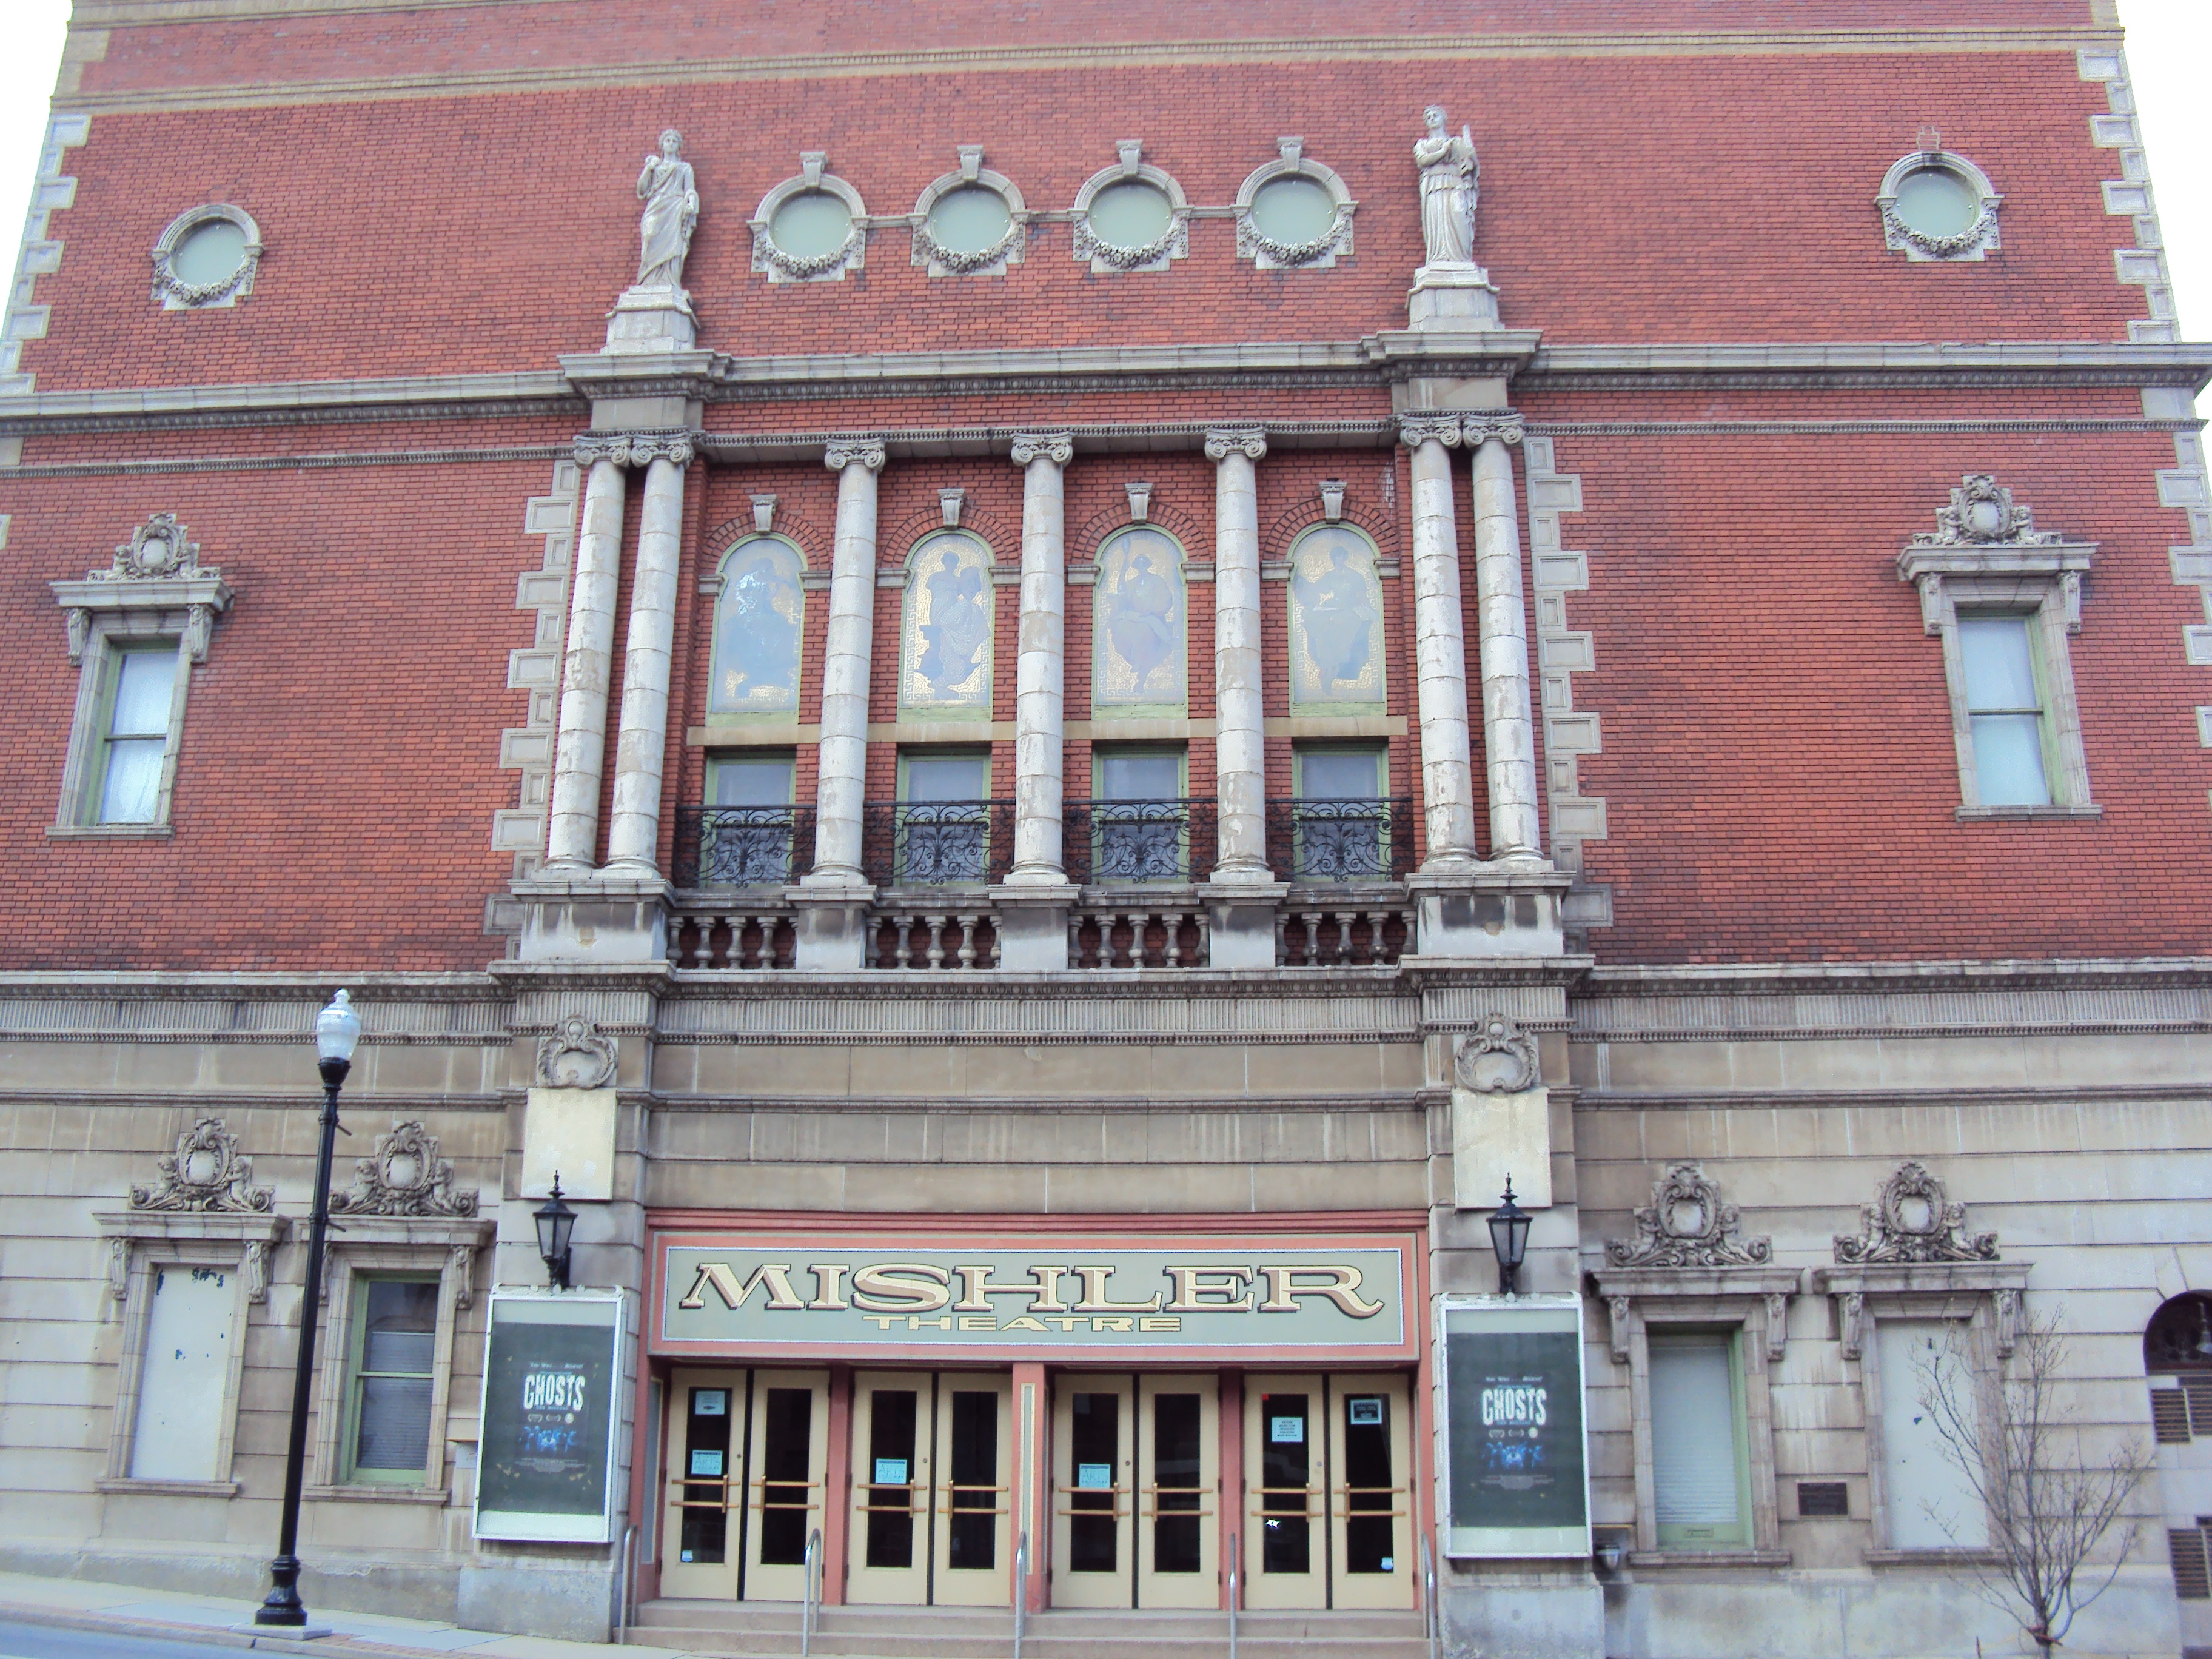 The Mishler Theatre today